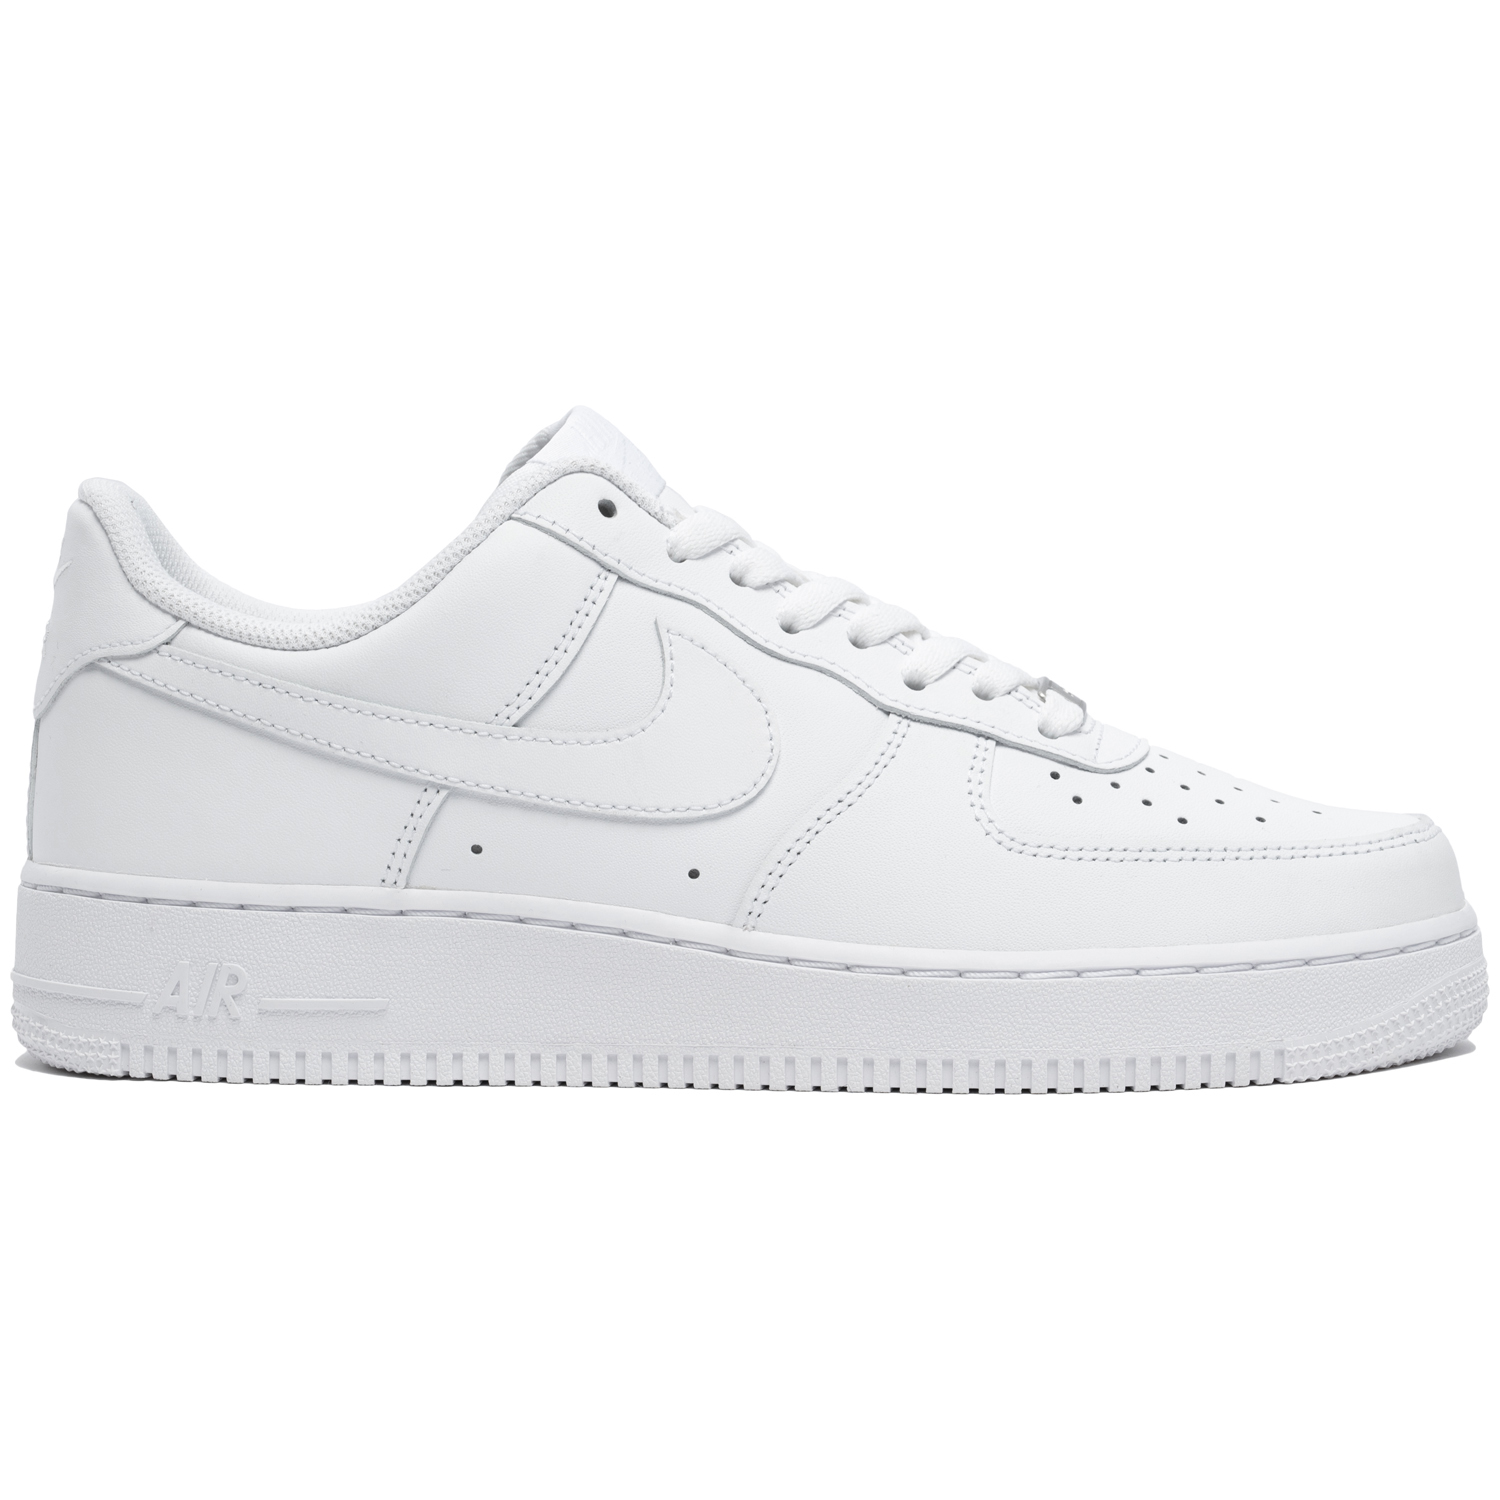 olympia sports air force ones